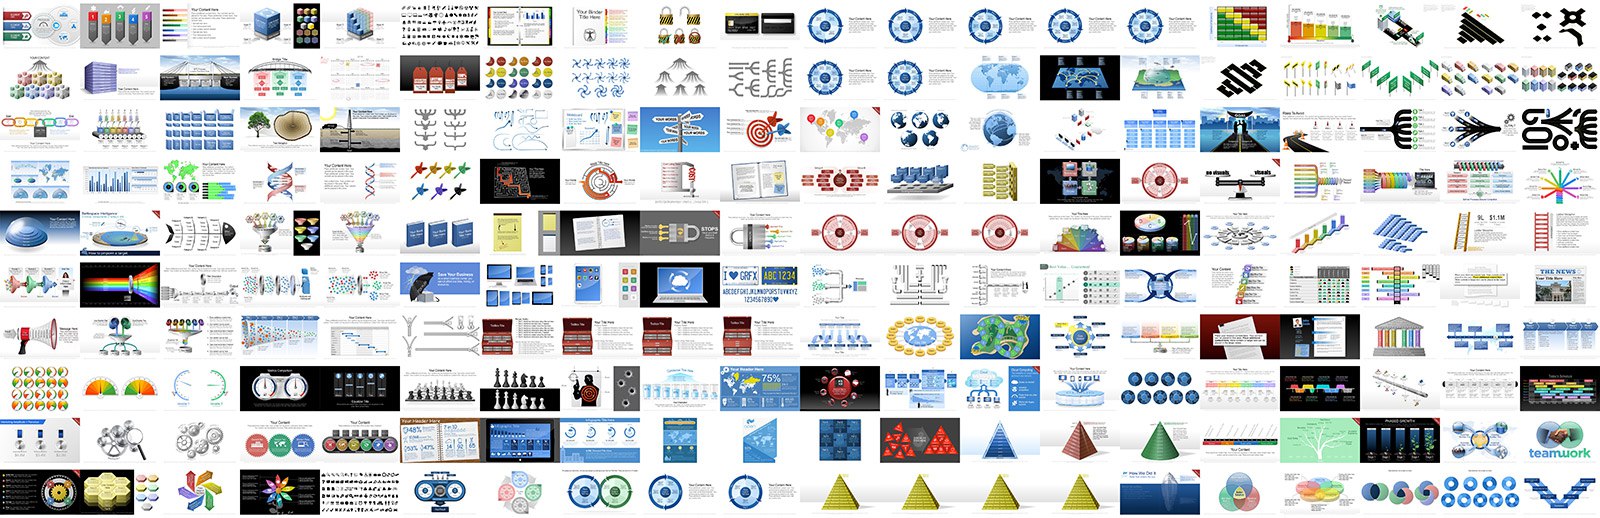 Free PowerPoint Graphics